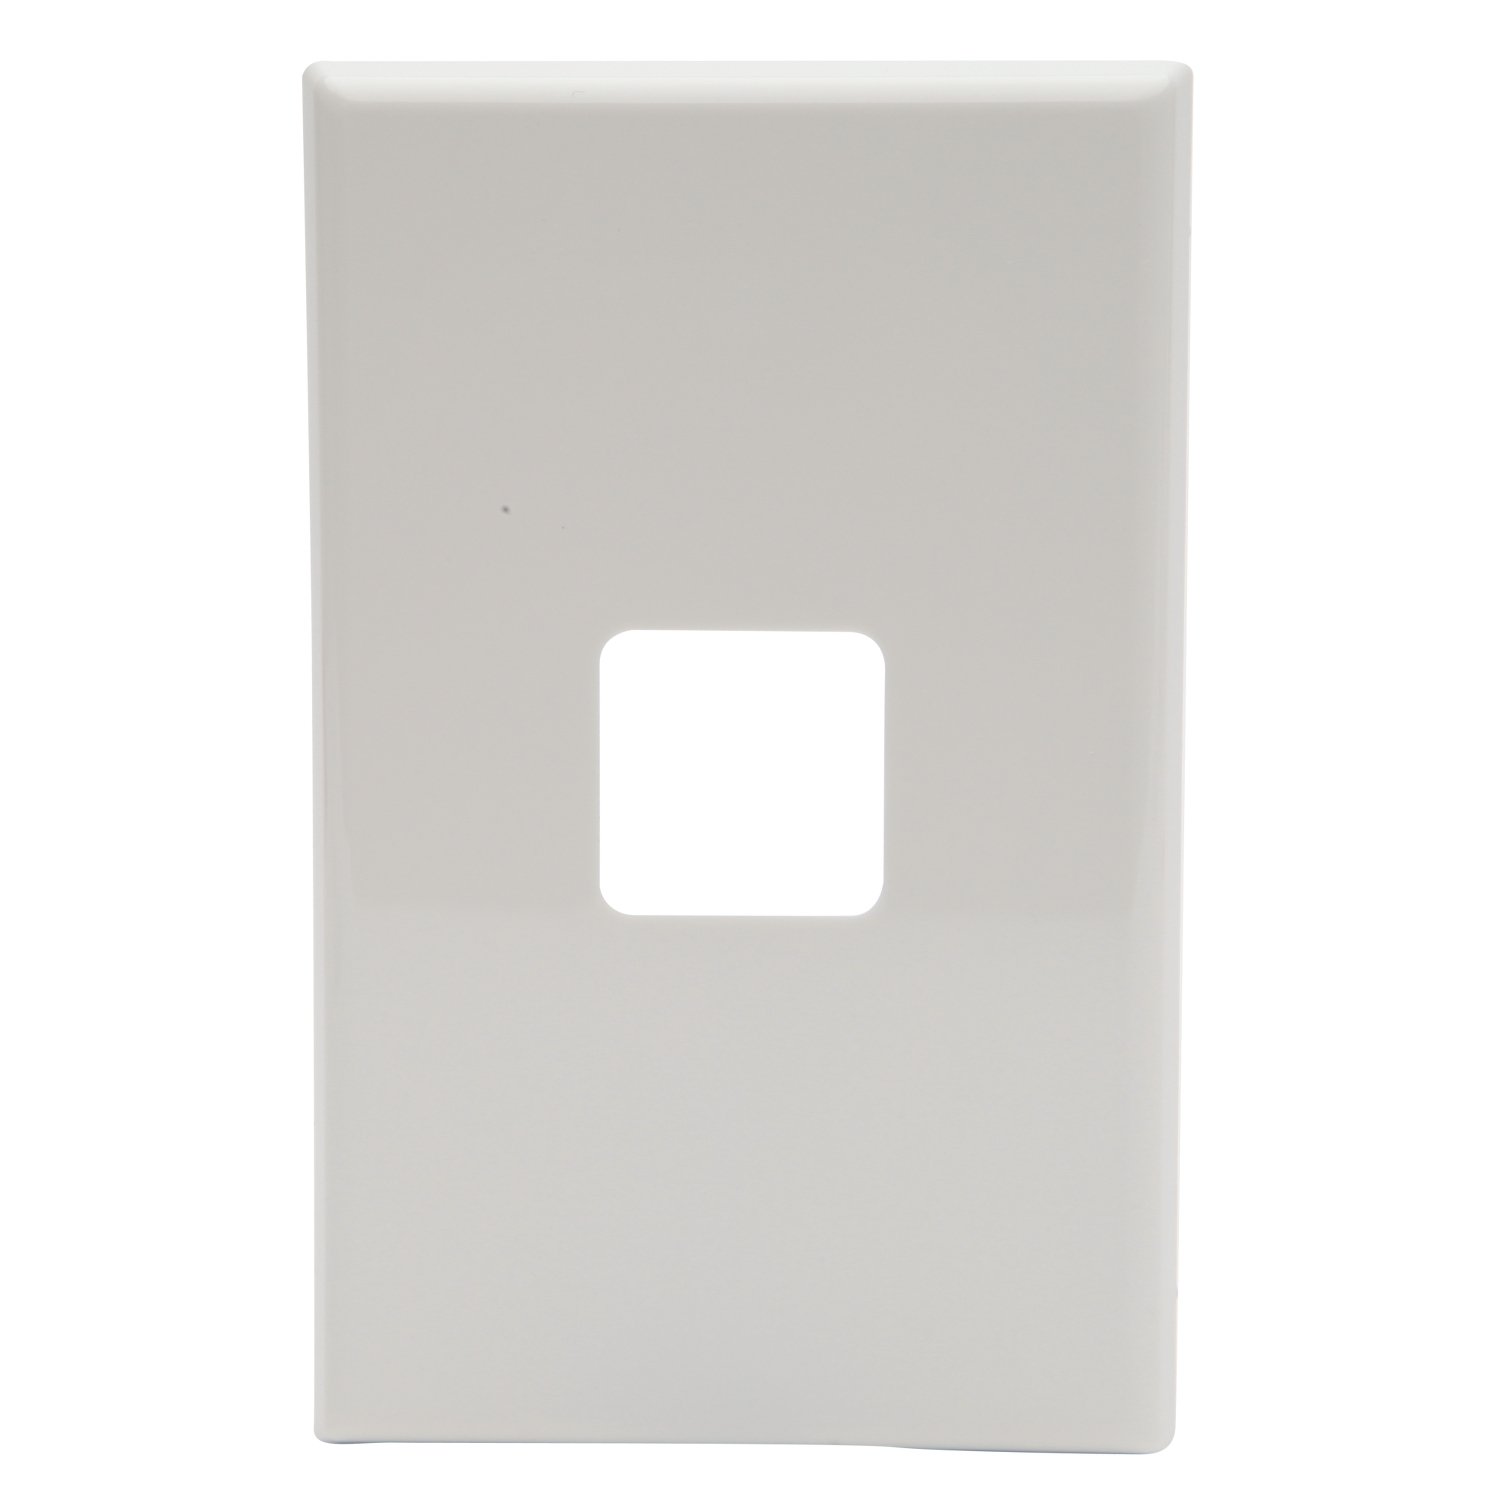 PDL 600 Series - Grid + Cover Plate Switch 1-Gang - White